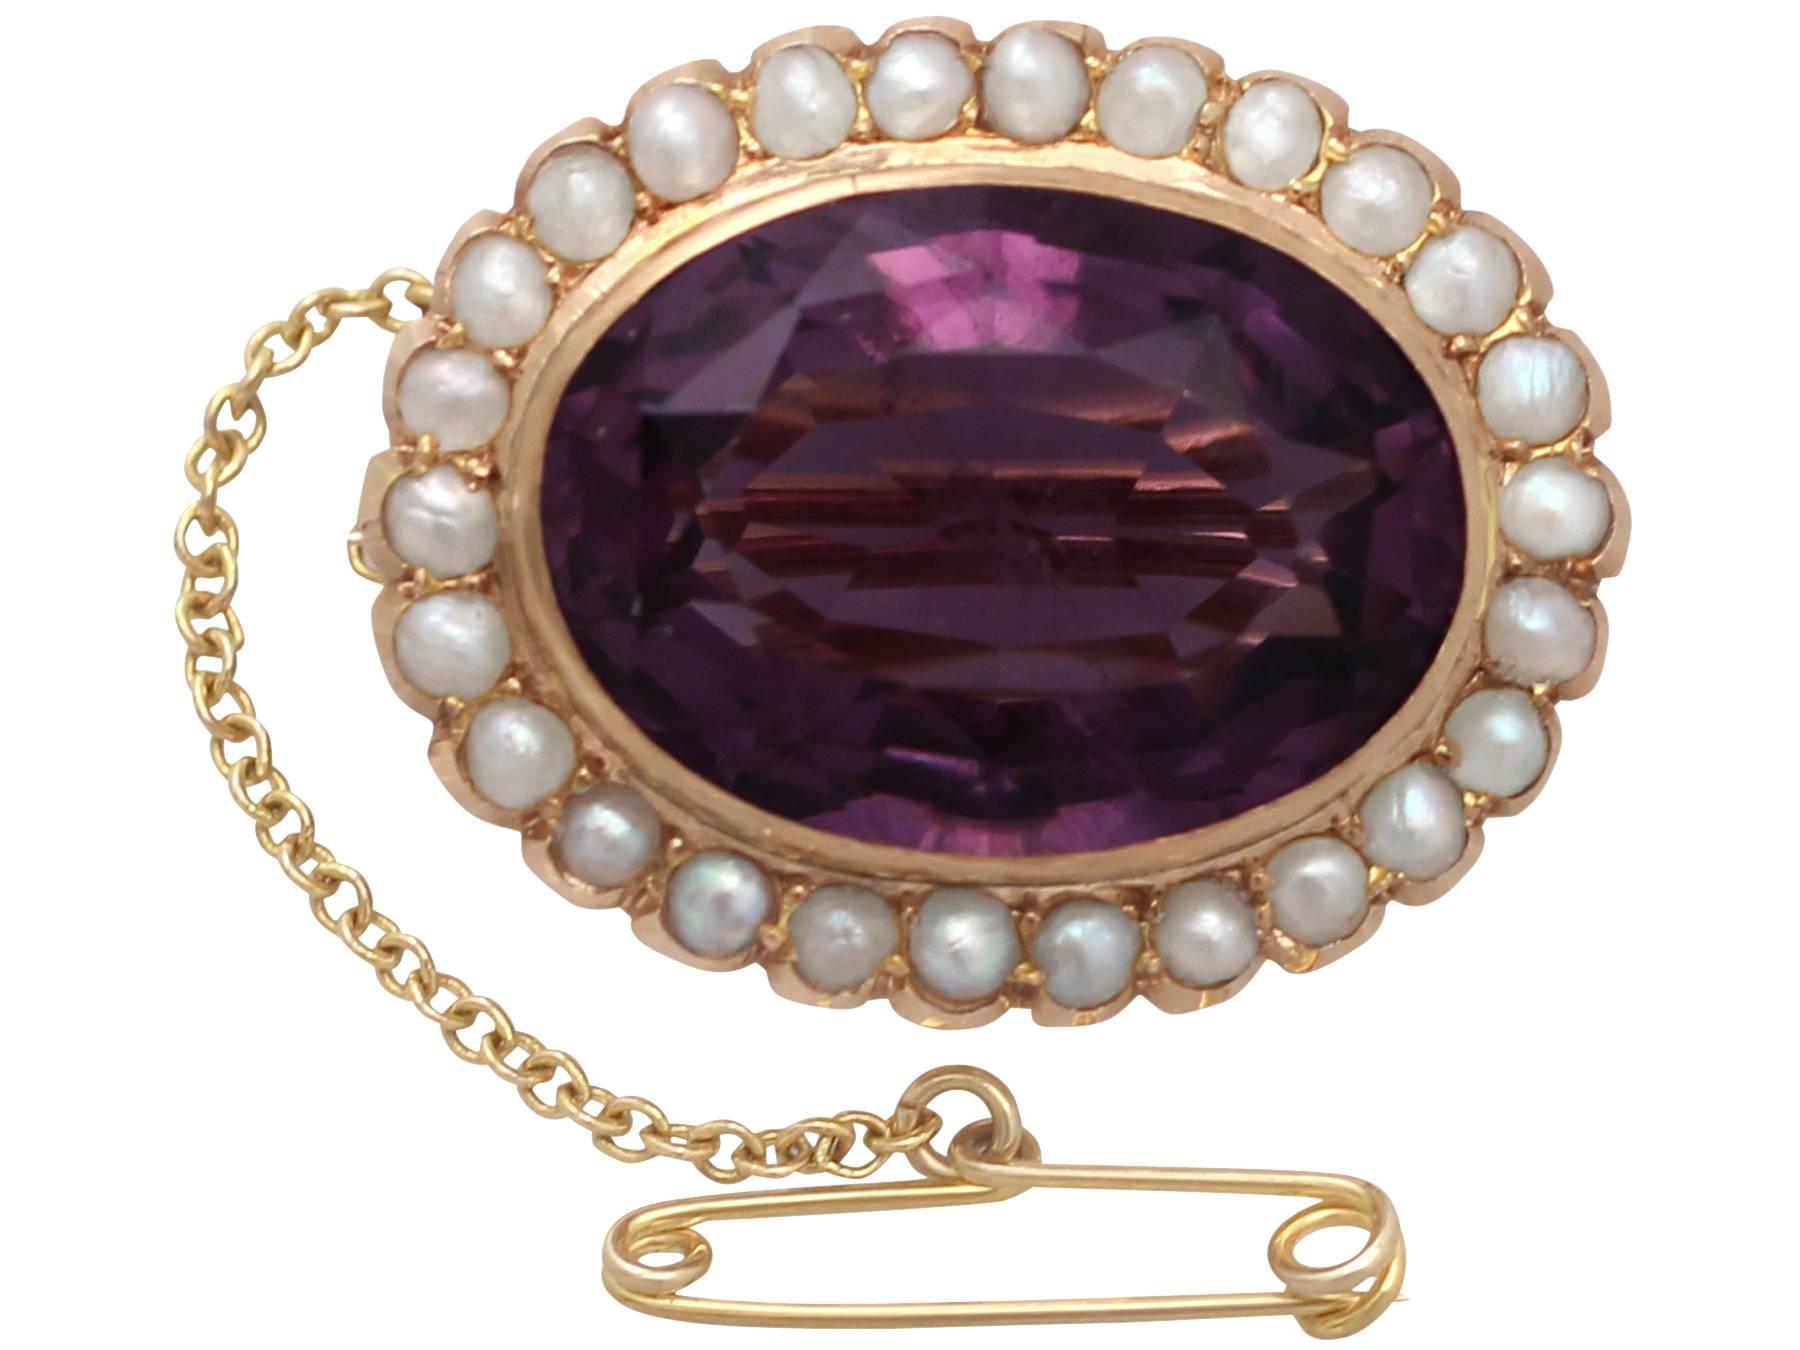 17.05Ct Amethyst and Pearl 9k Yellow Gold Brooch - Antique Edwardian 1